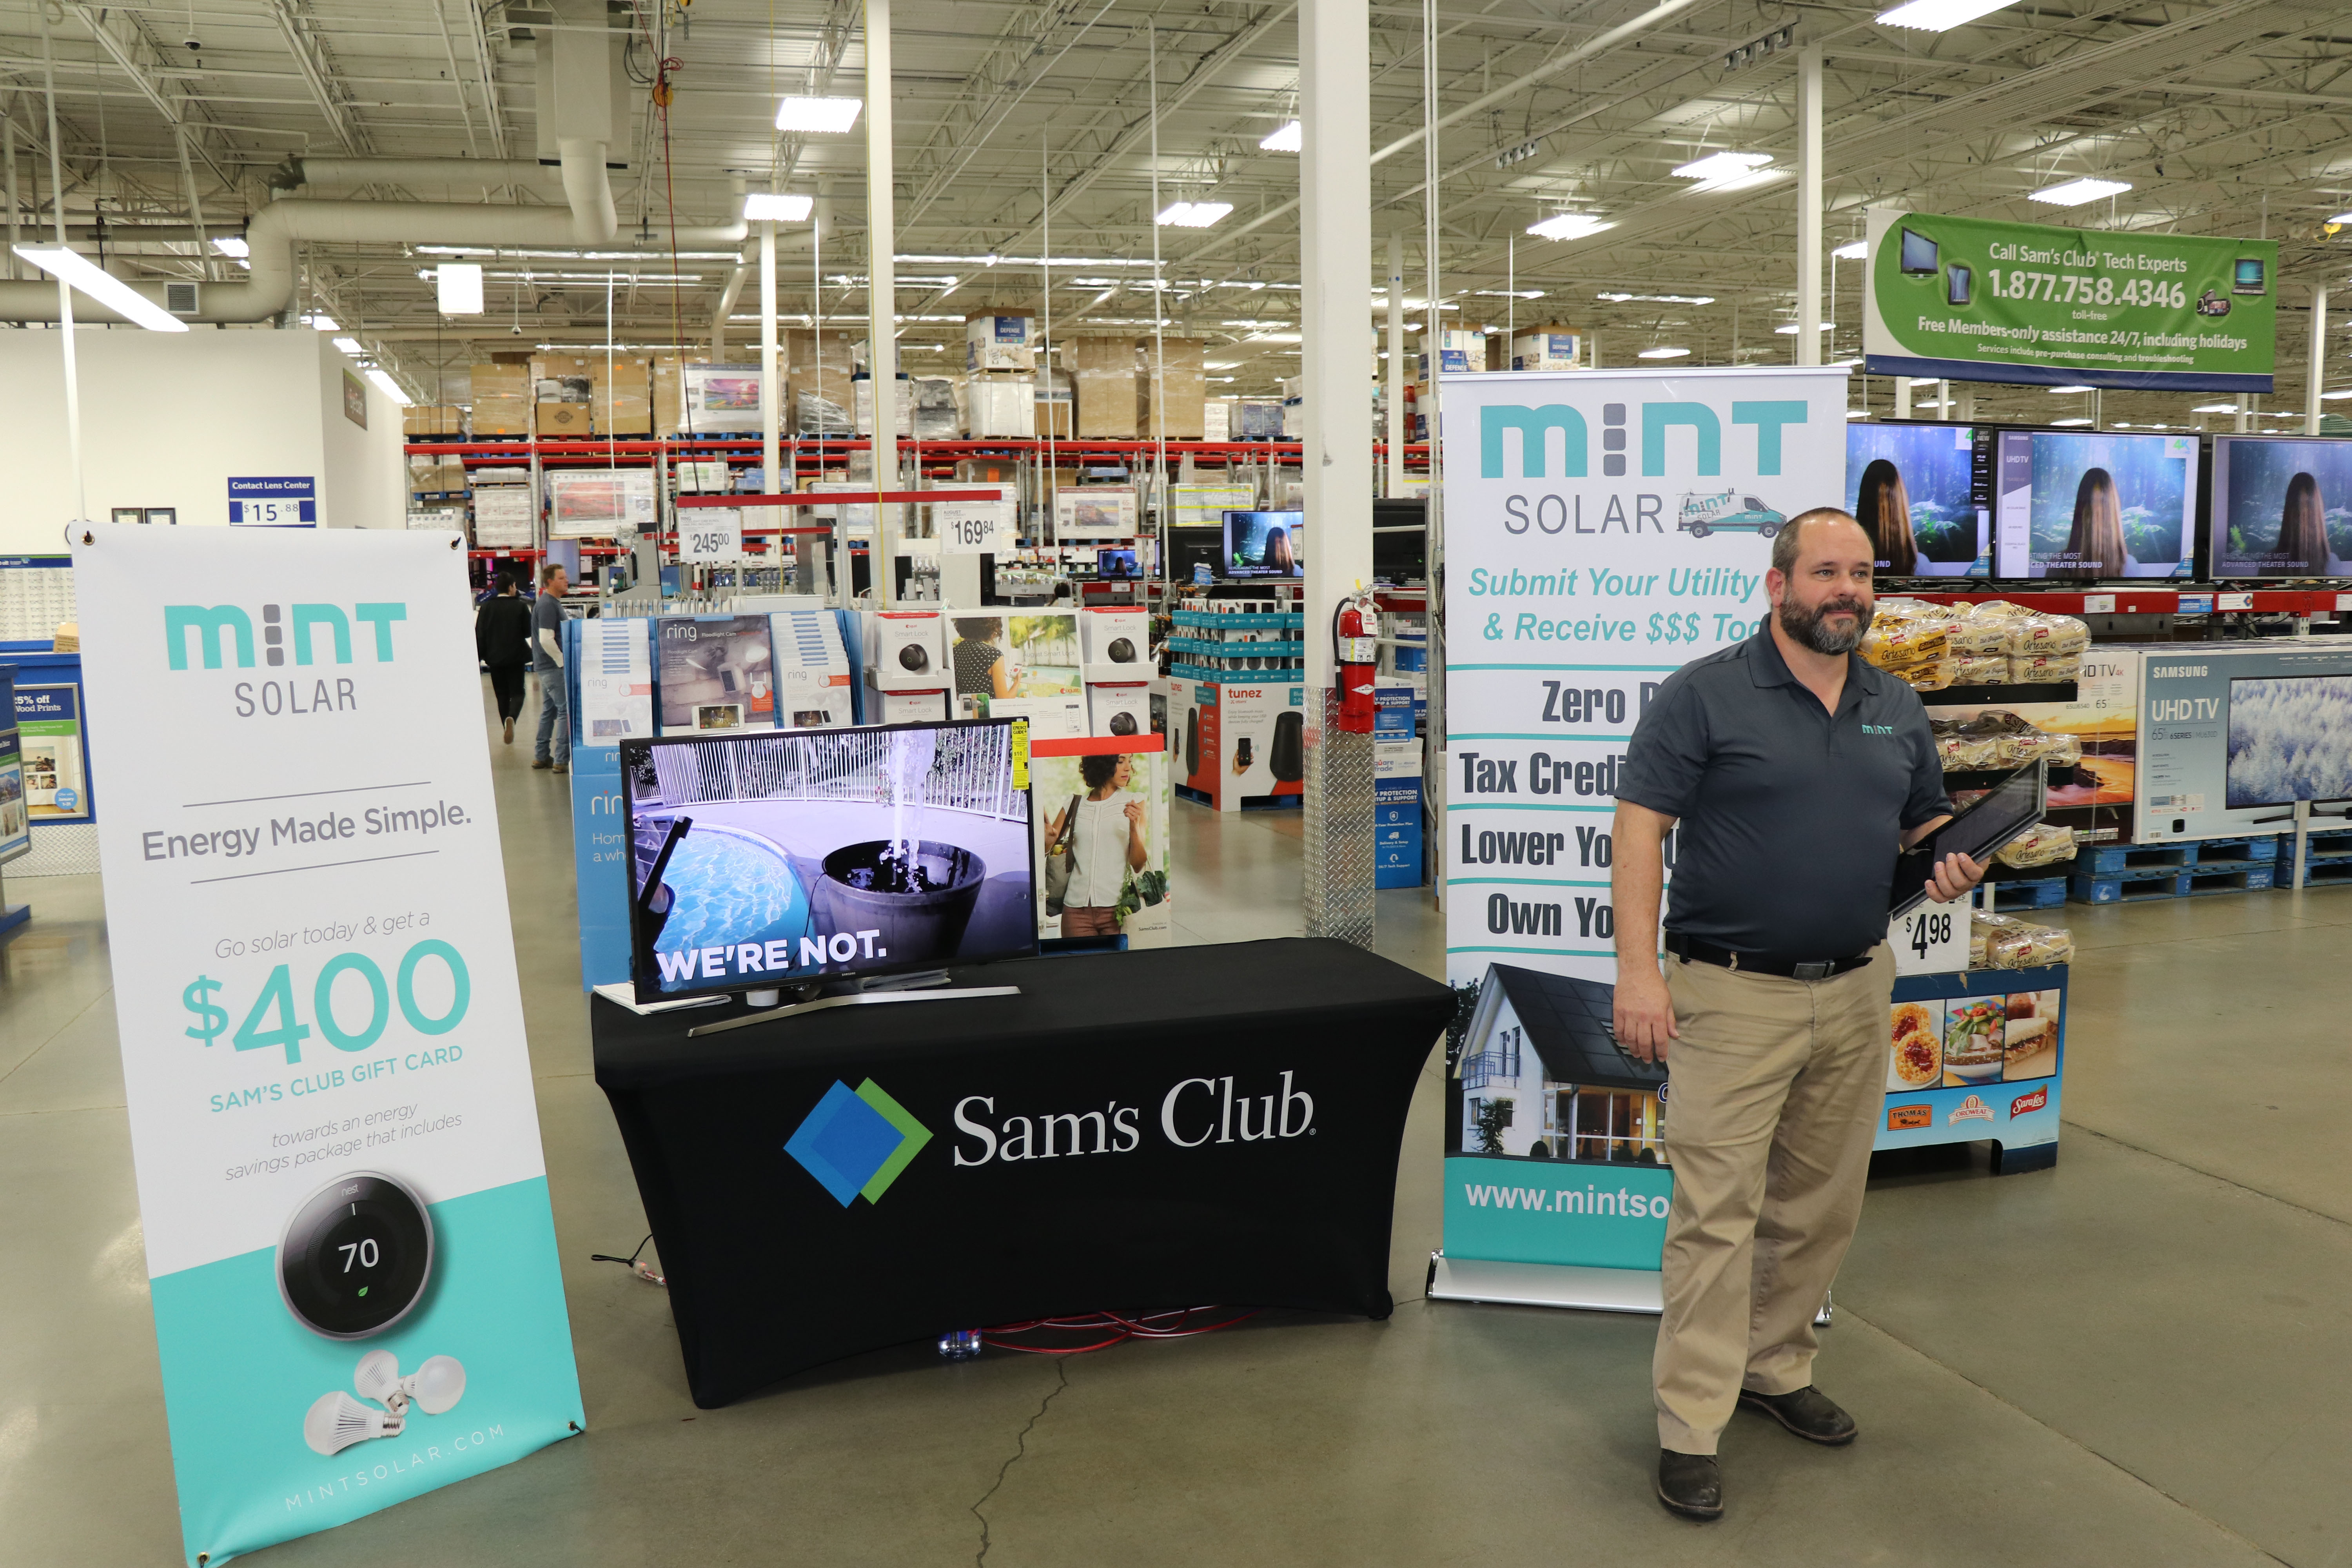 Mint Solar Debuts in Eight Sam's Club Locations in Southern California